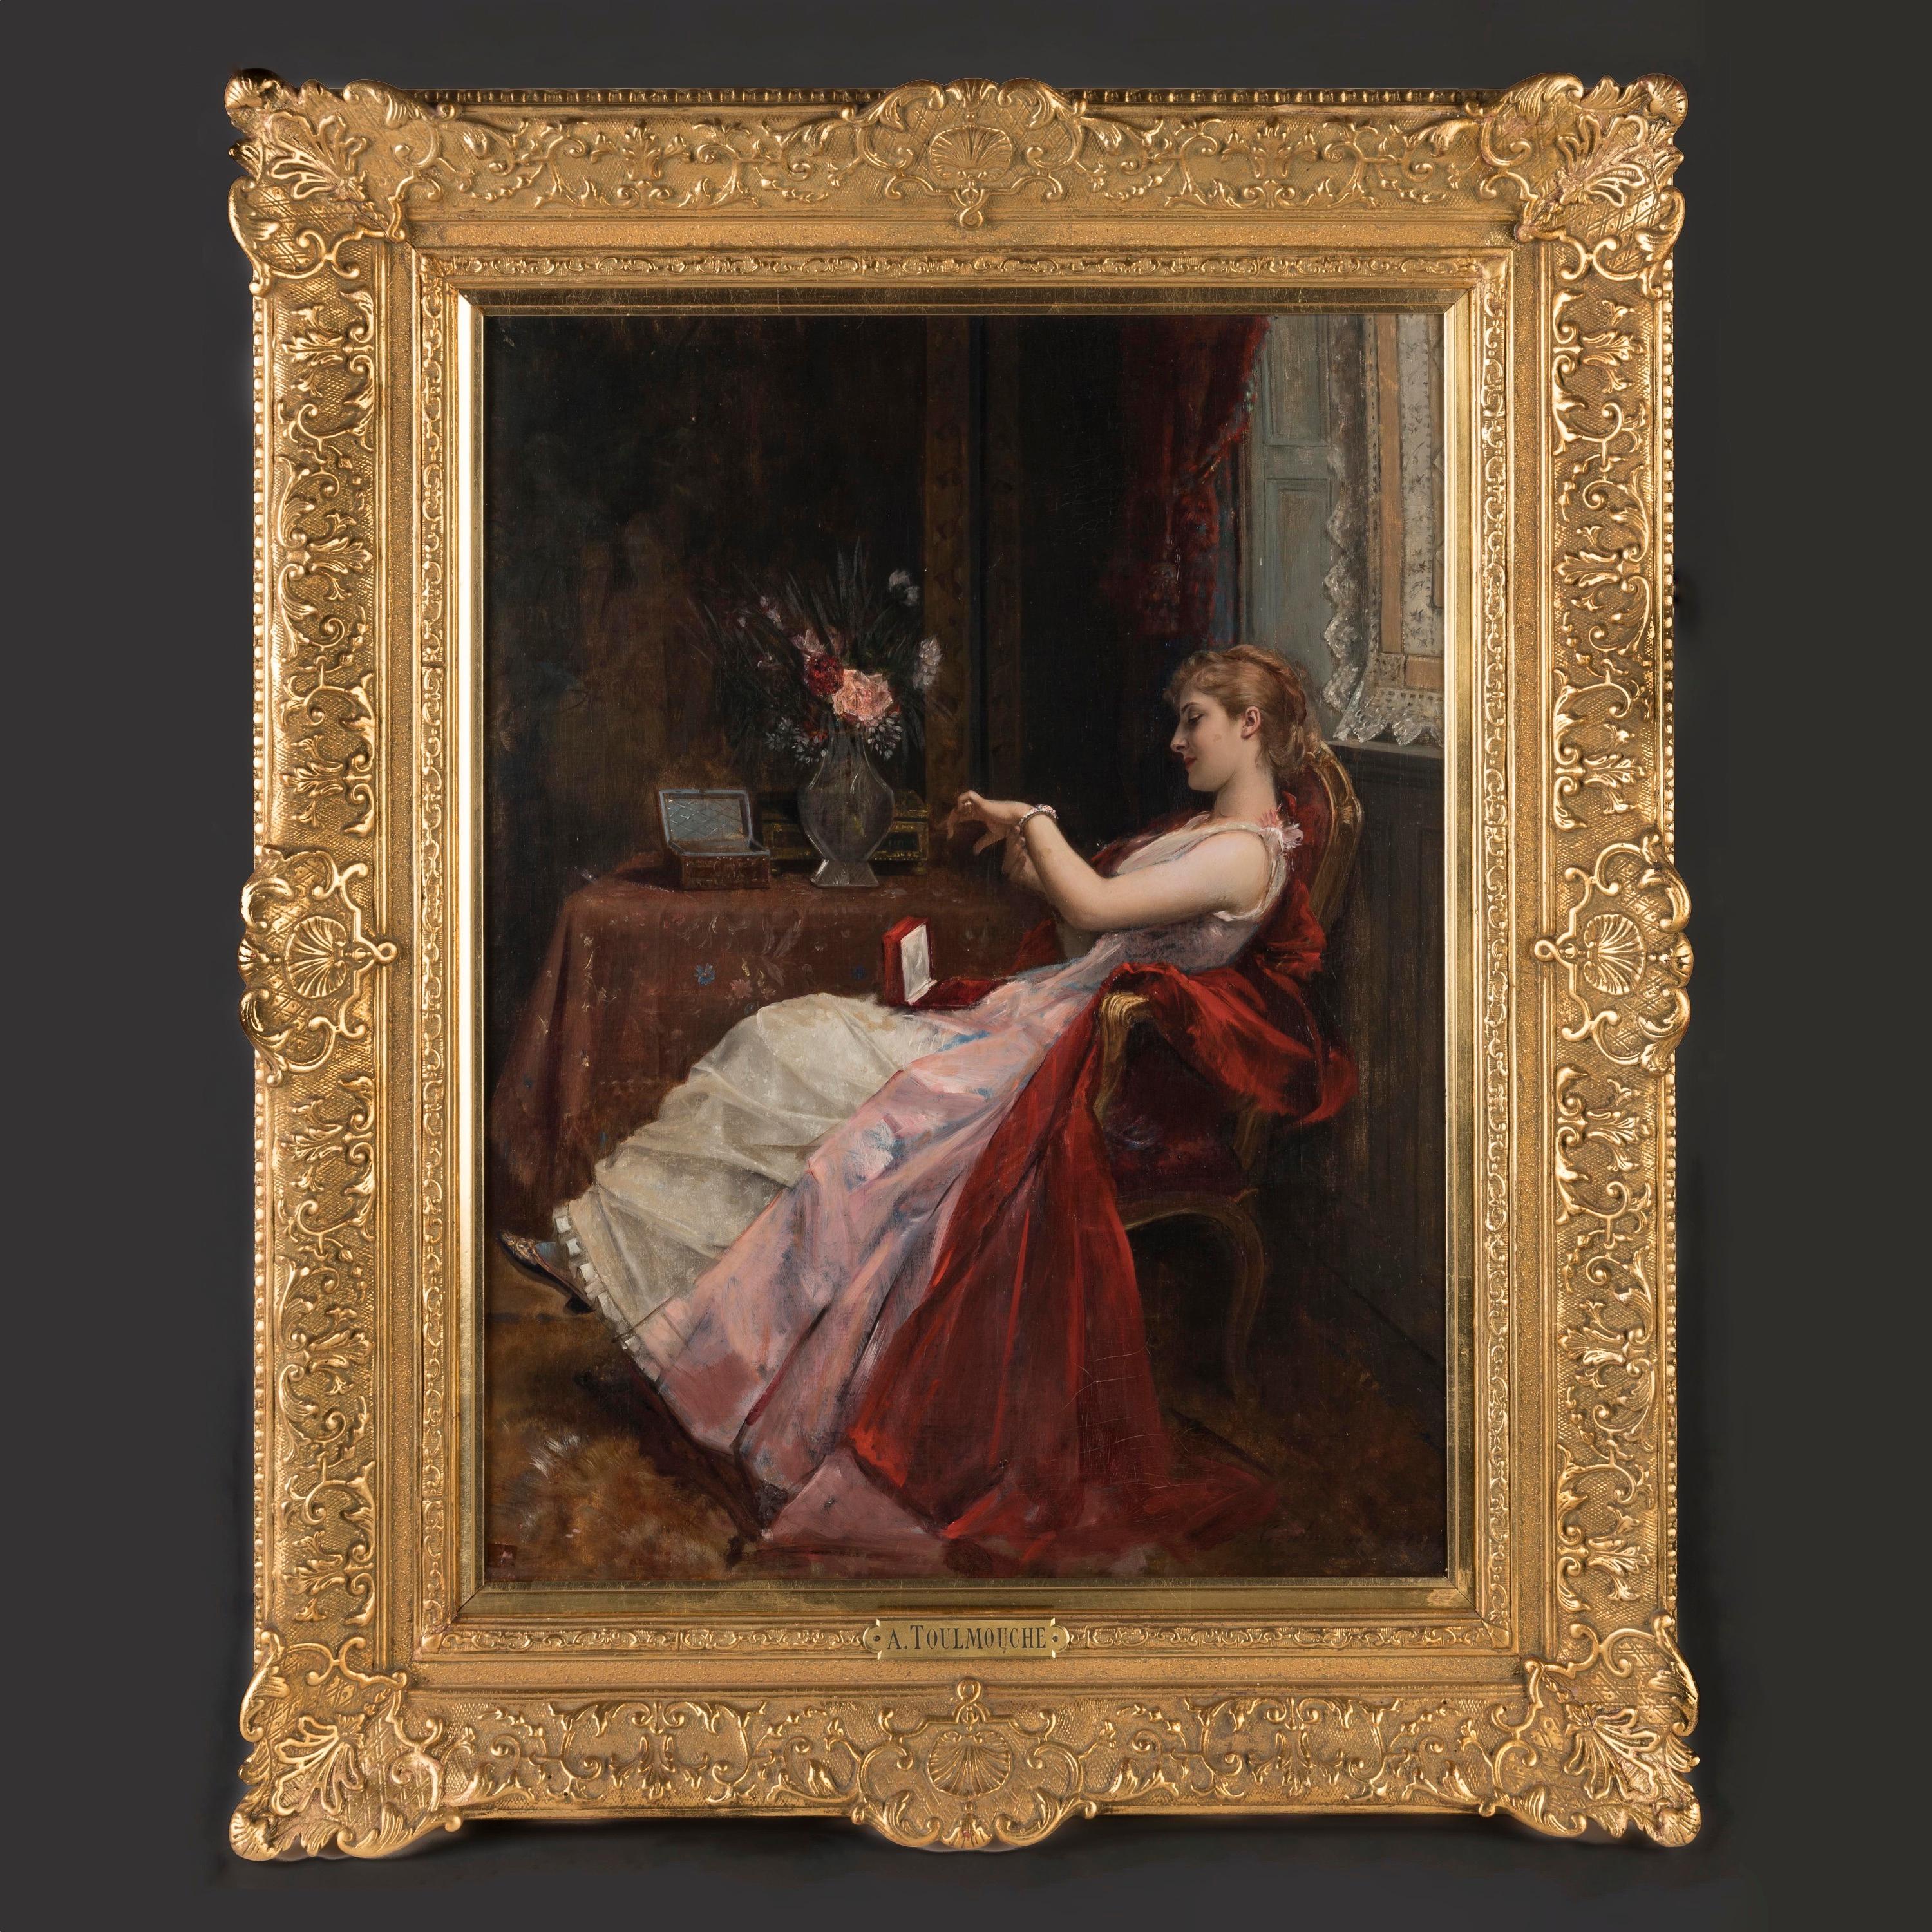 An Elegant Lady Admiring her Present
By Auguste Toulmouche (1829-1890)

An Oil on Canvas work depicting a well-heeled young lady, seated in her pink gown, admiring her new bracelet around her wrist. Signed and dated by the artist, bottom